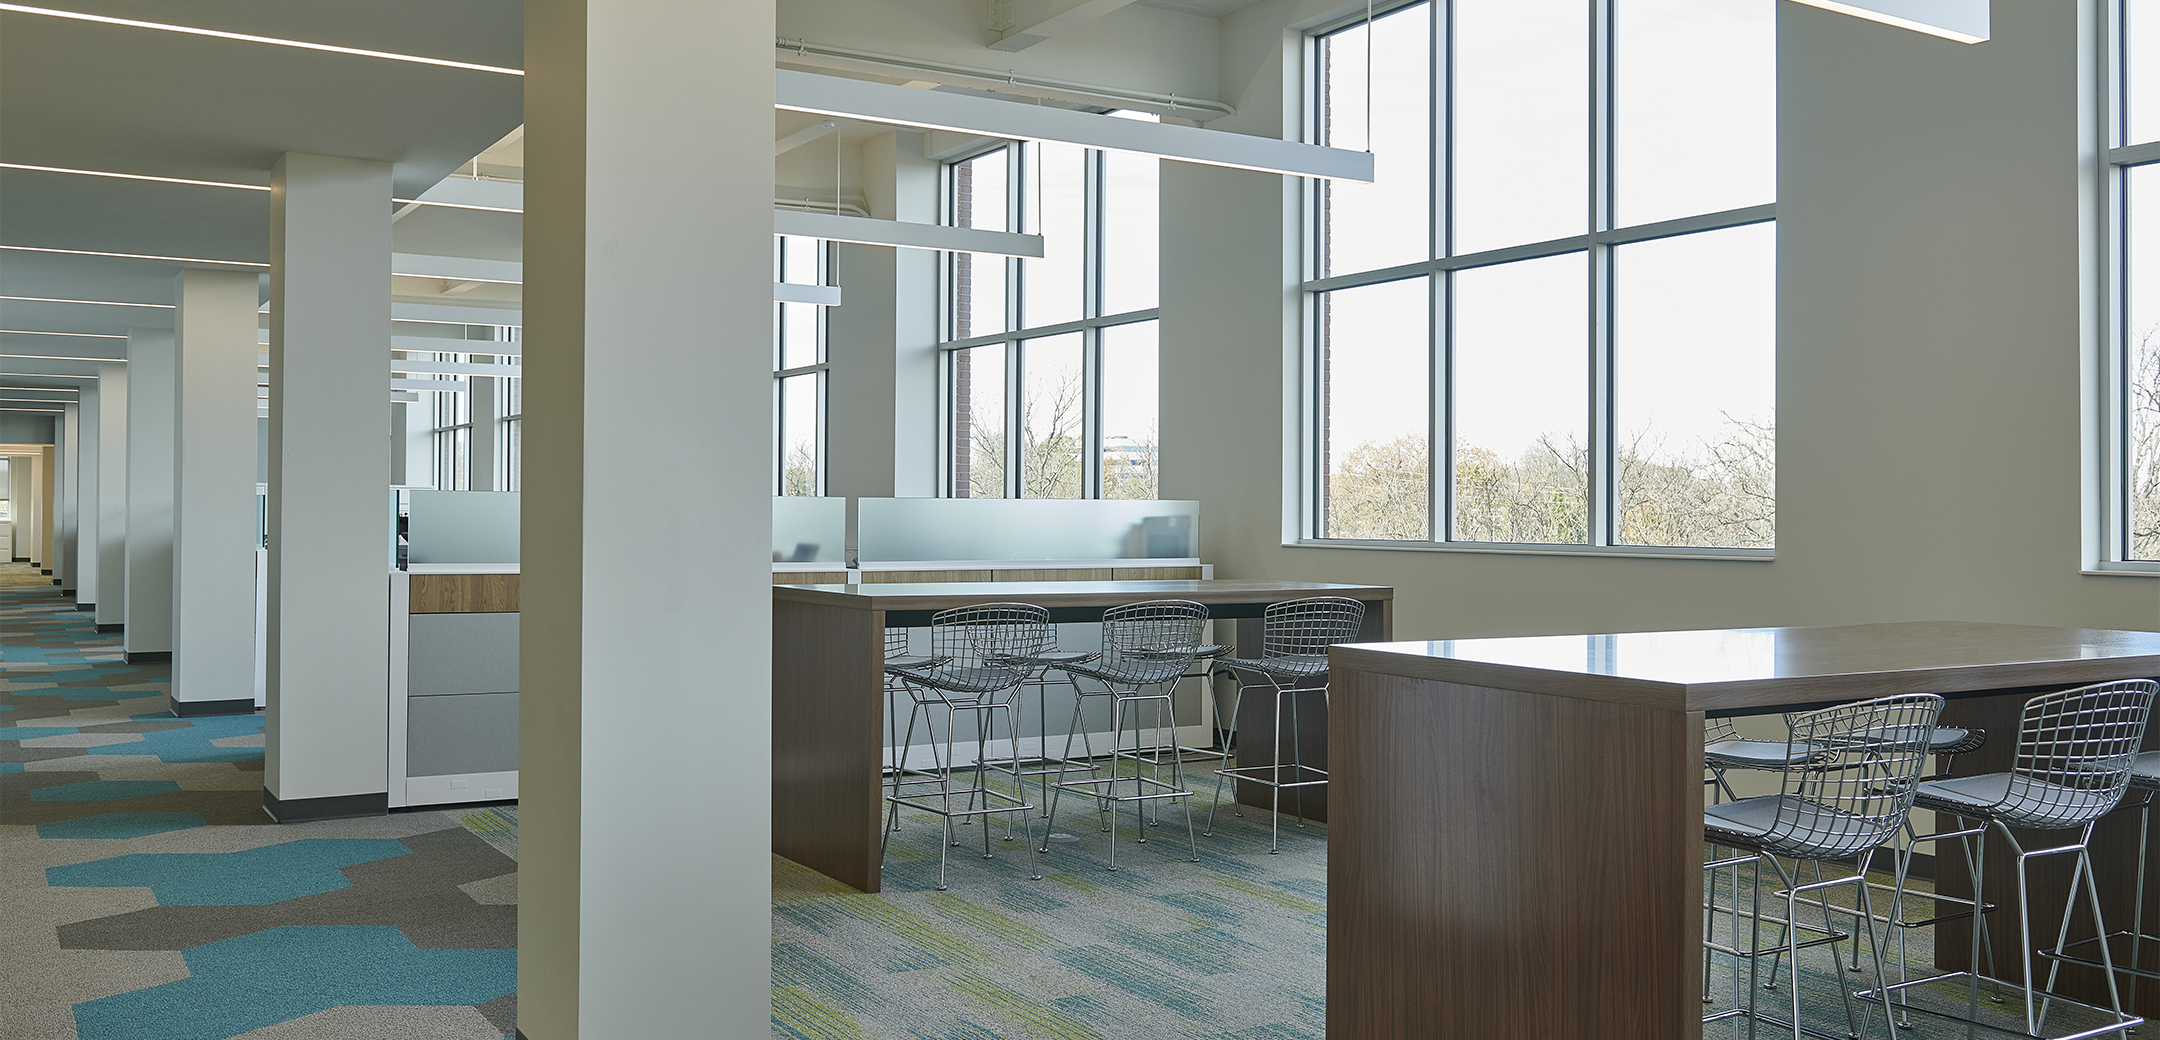 The interior office space of UGI Energy Services featuring large windows and open concept cubicles with metal chairs.